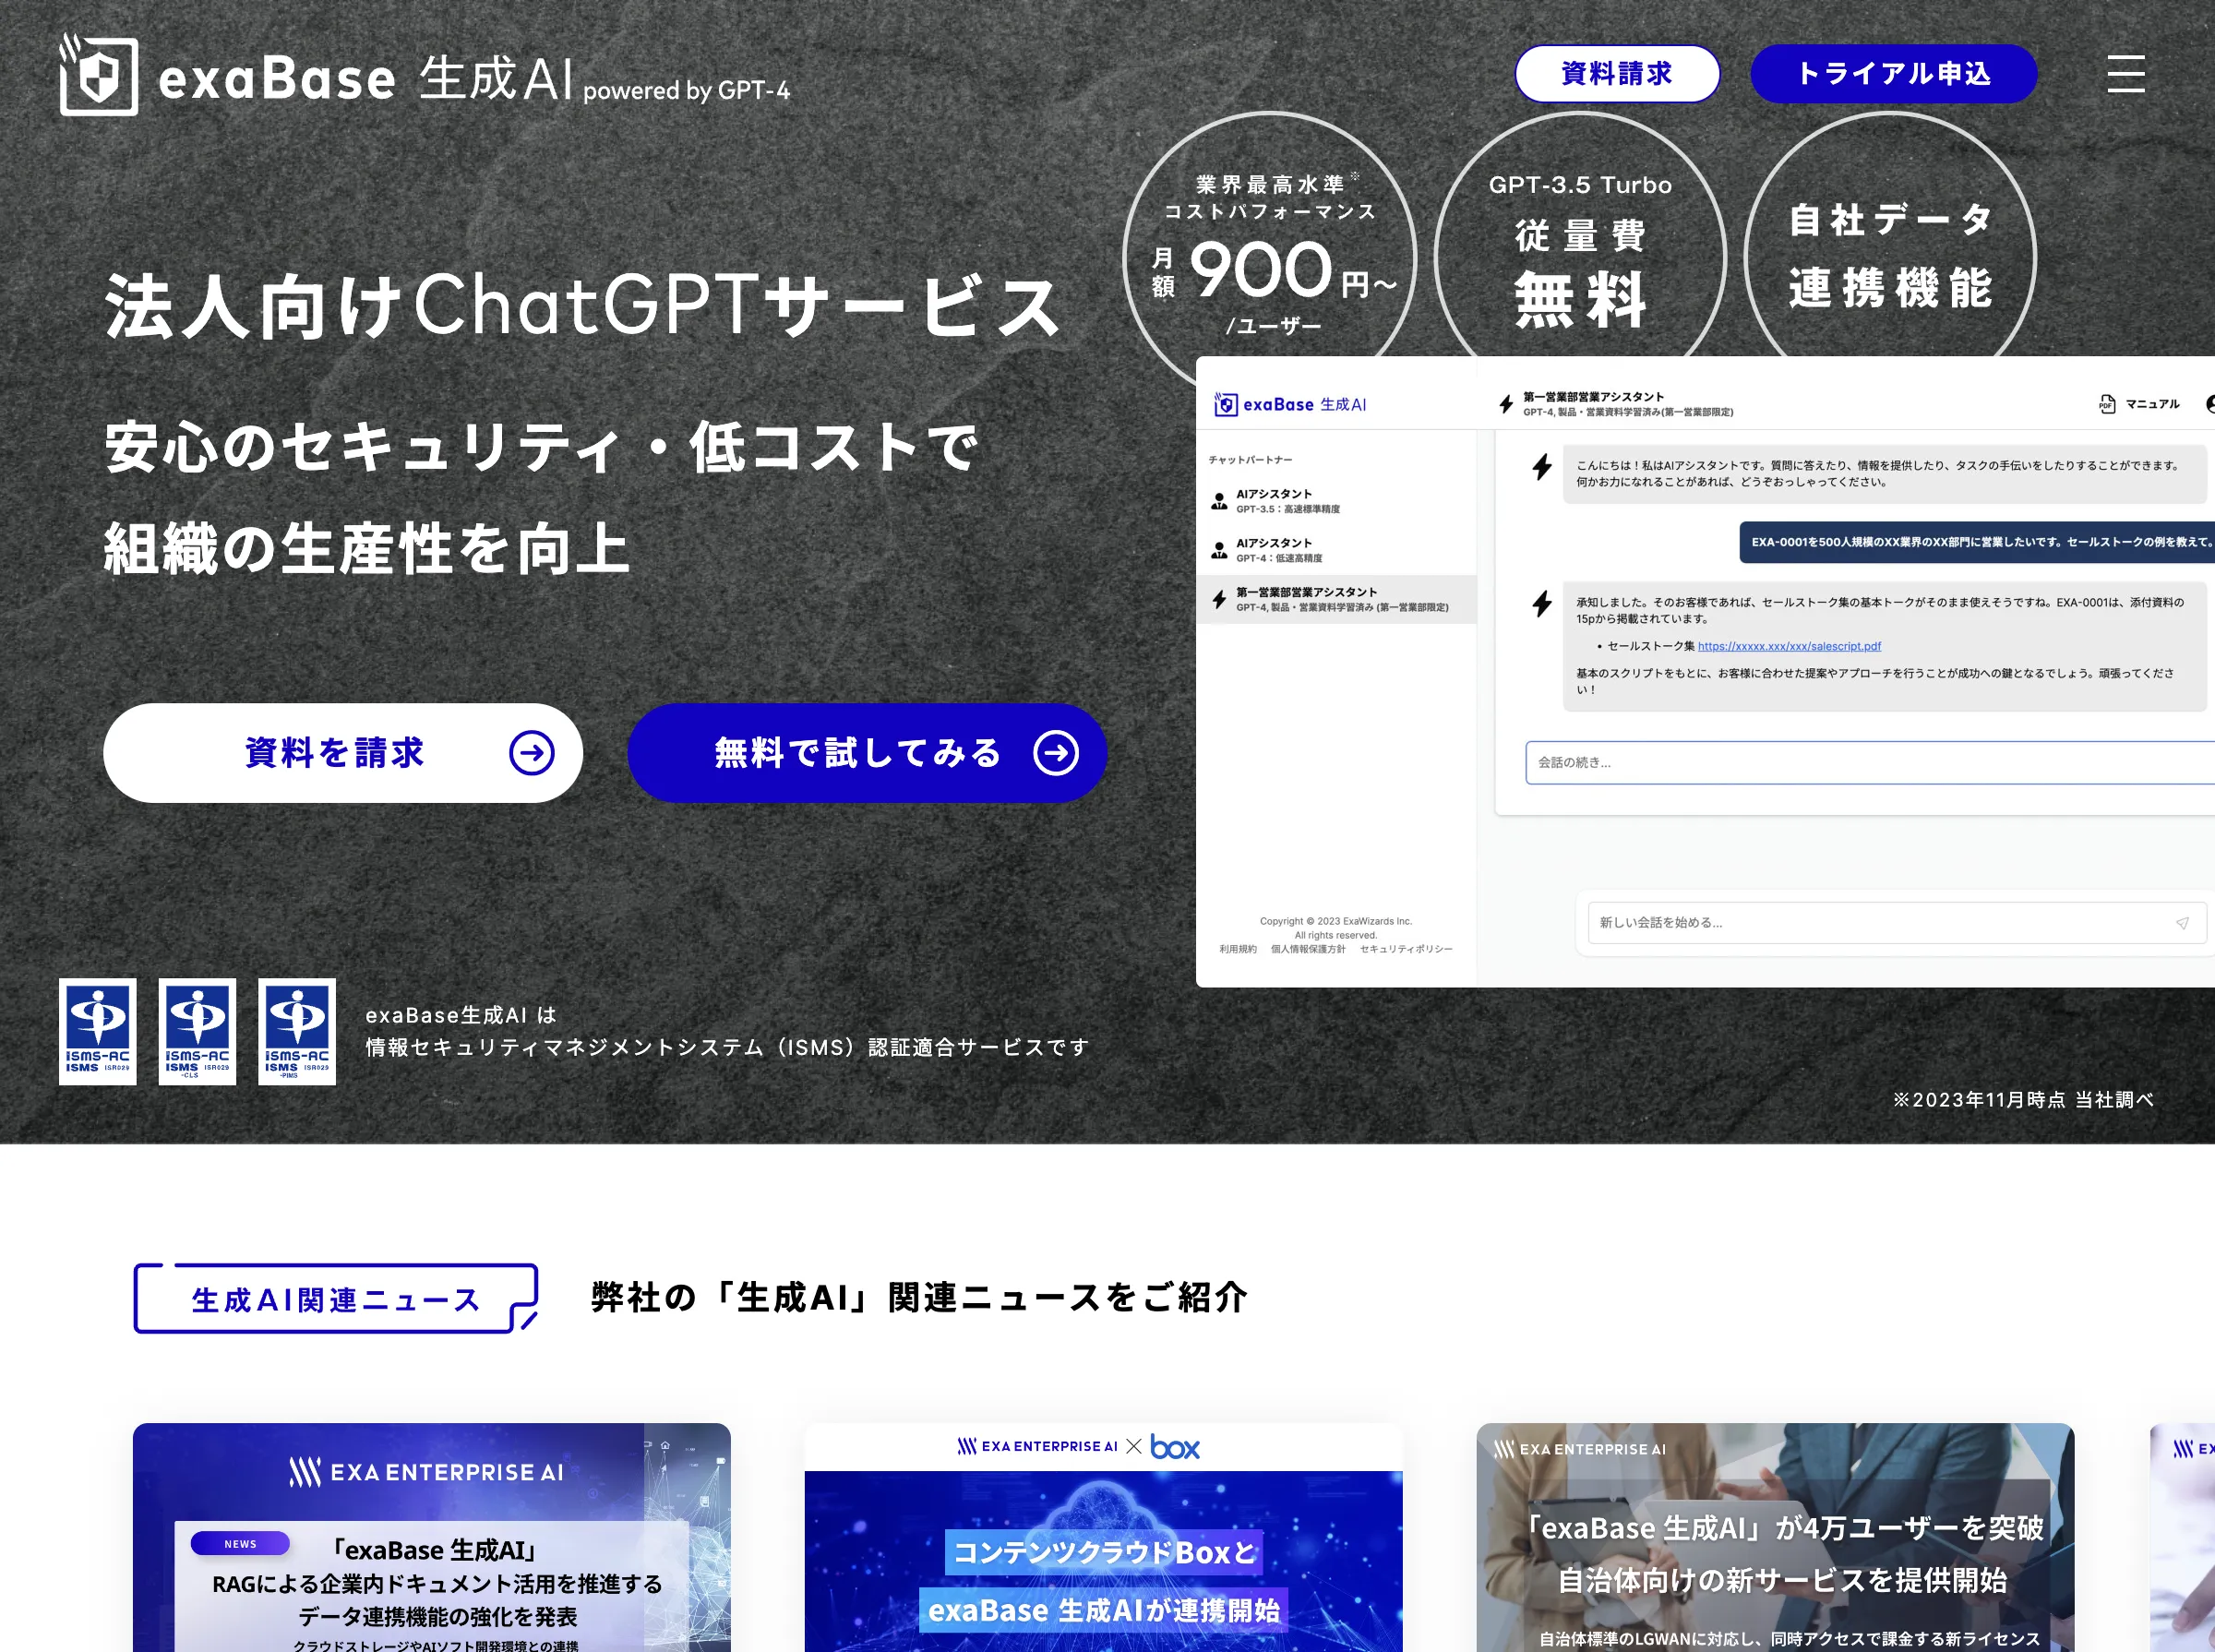 exaBase 生成AI powered by GPT-4(株式会社エクサウィザーズ)